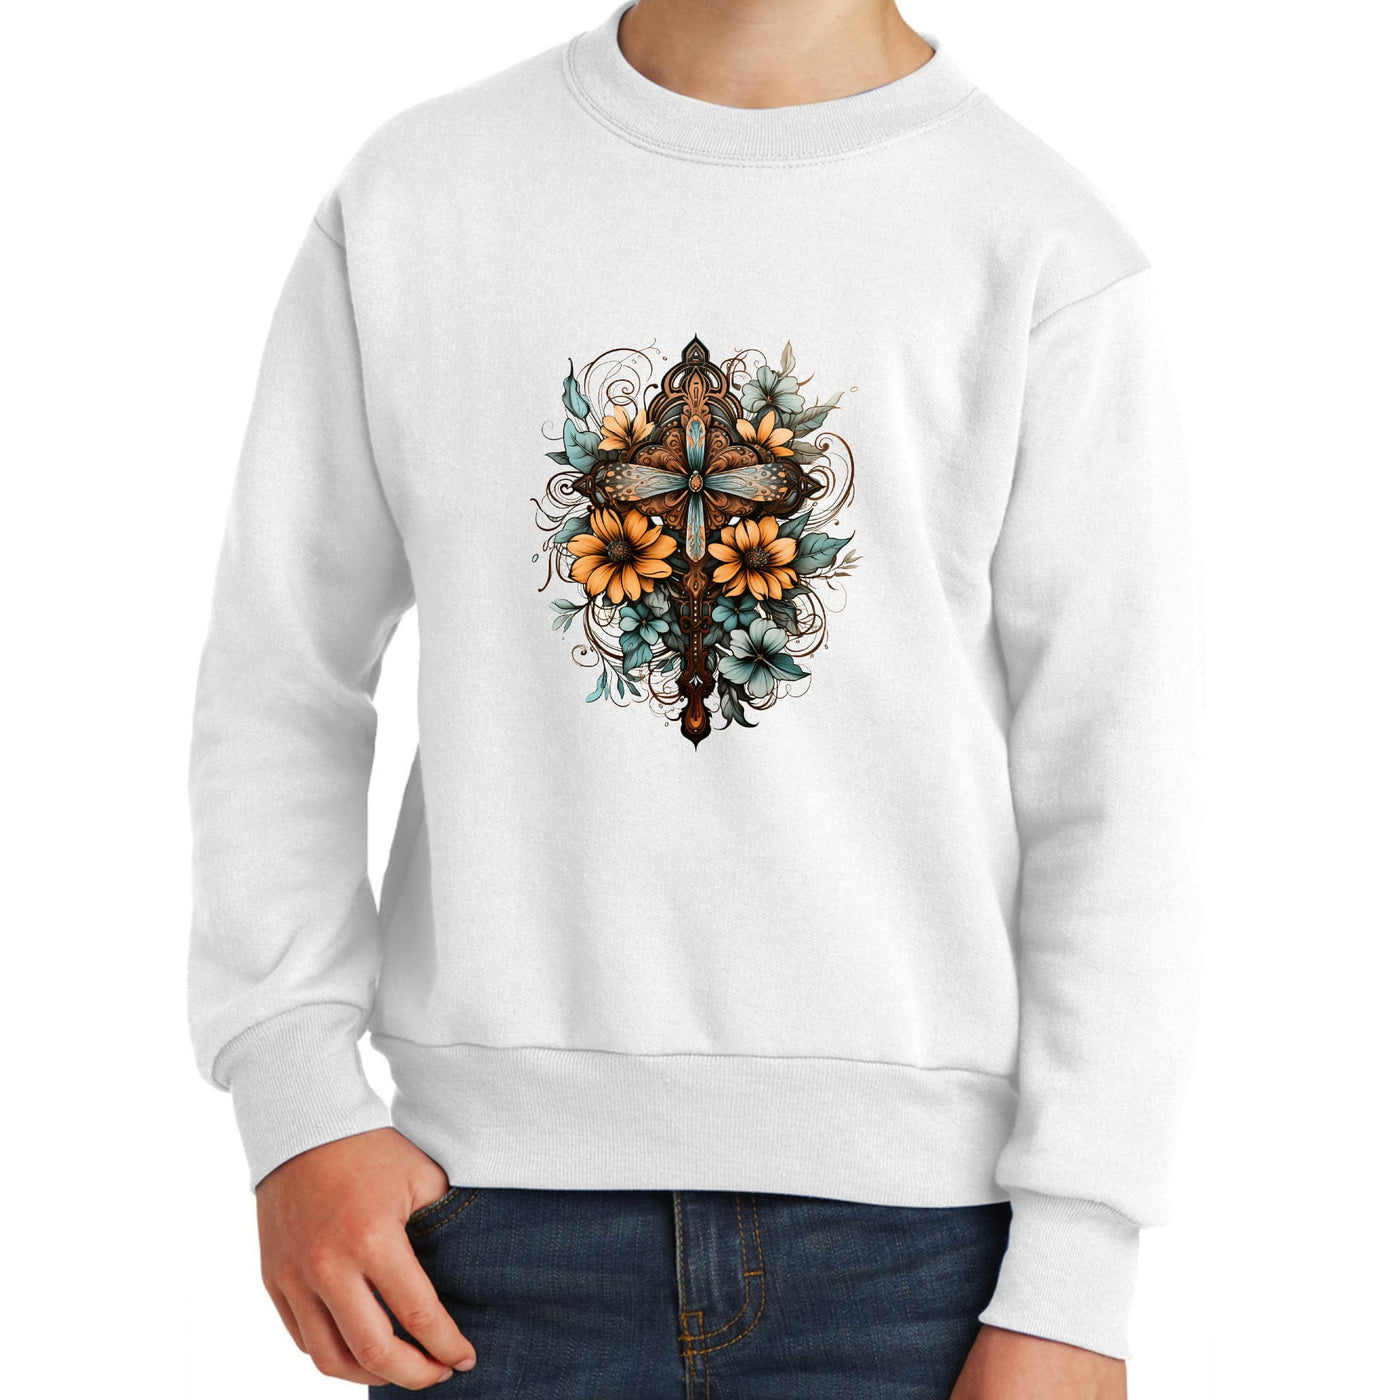 Youth Graphic Sweatshirt Christian Cross Floral Bouquet Brown - Youth